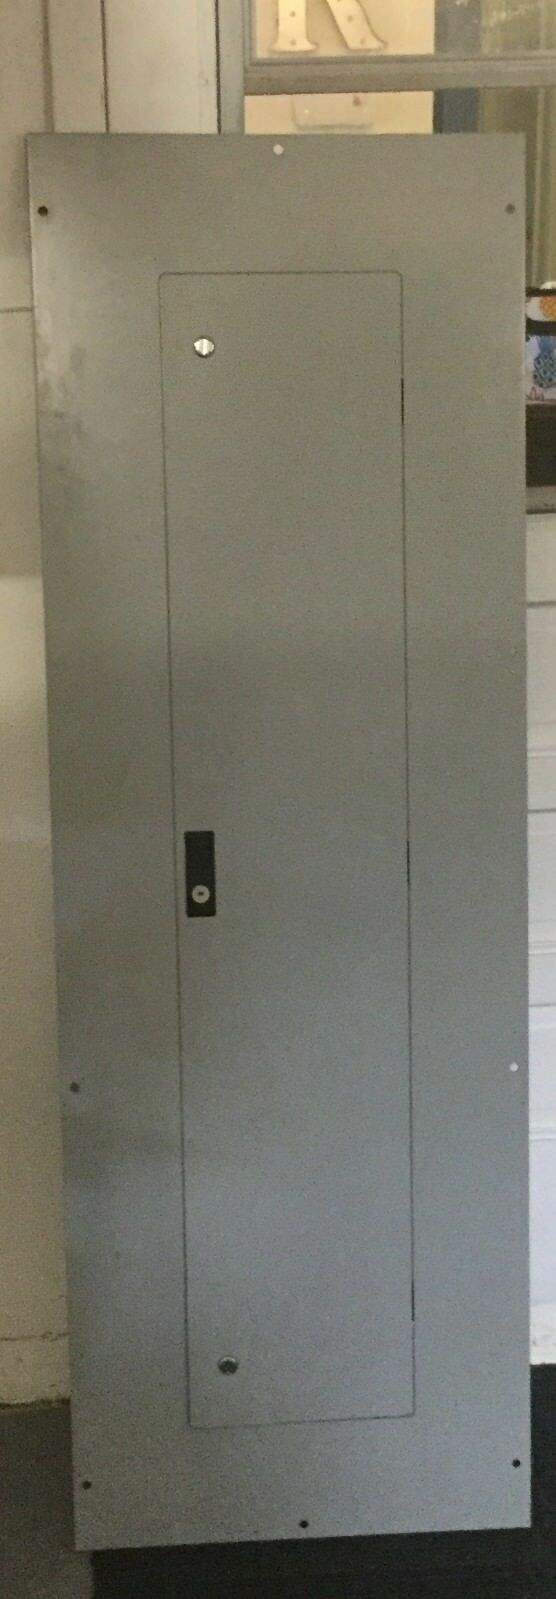 Cutler Hammer Eaton Ch Industrial Panel Cover / Door Only 60" Tall